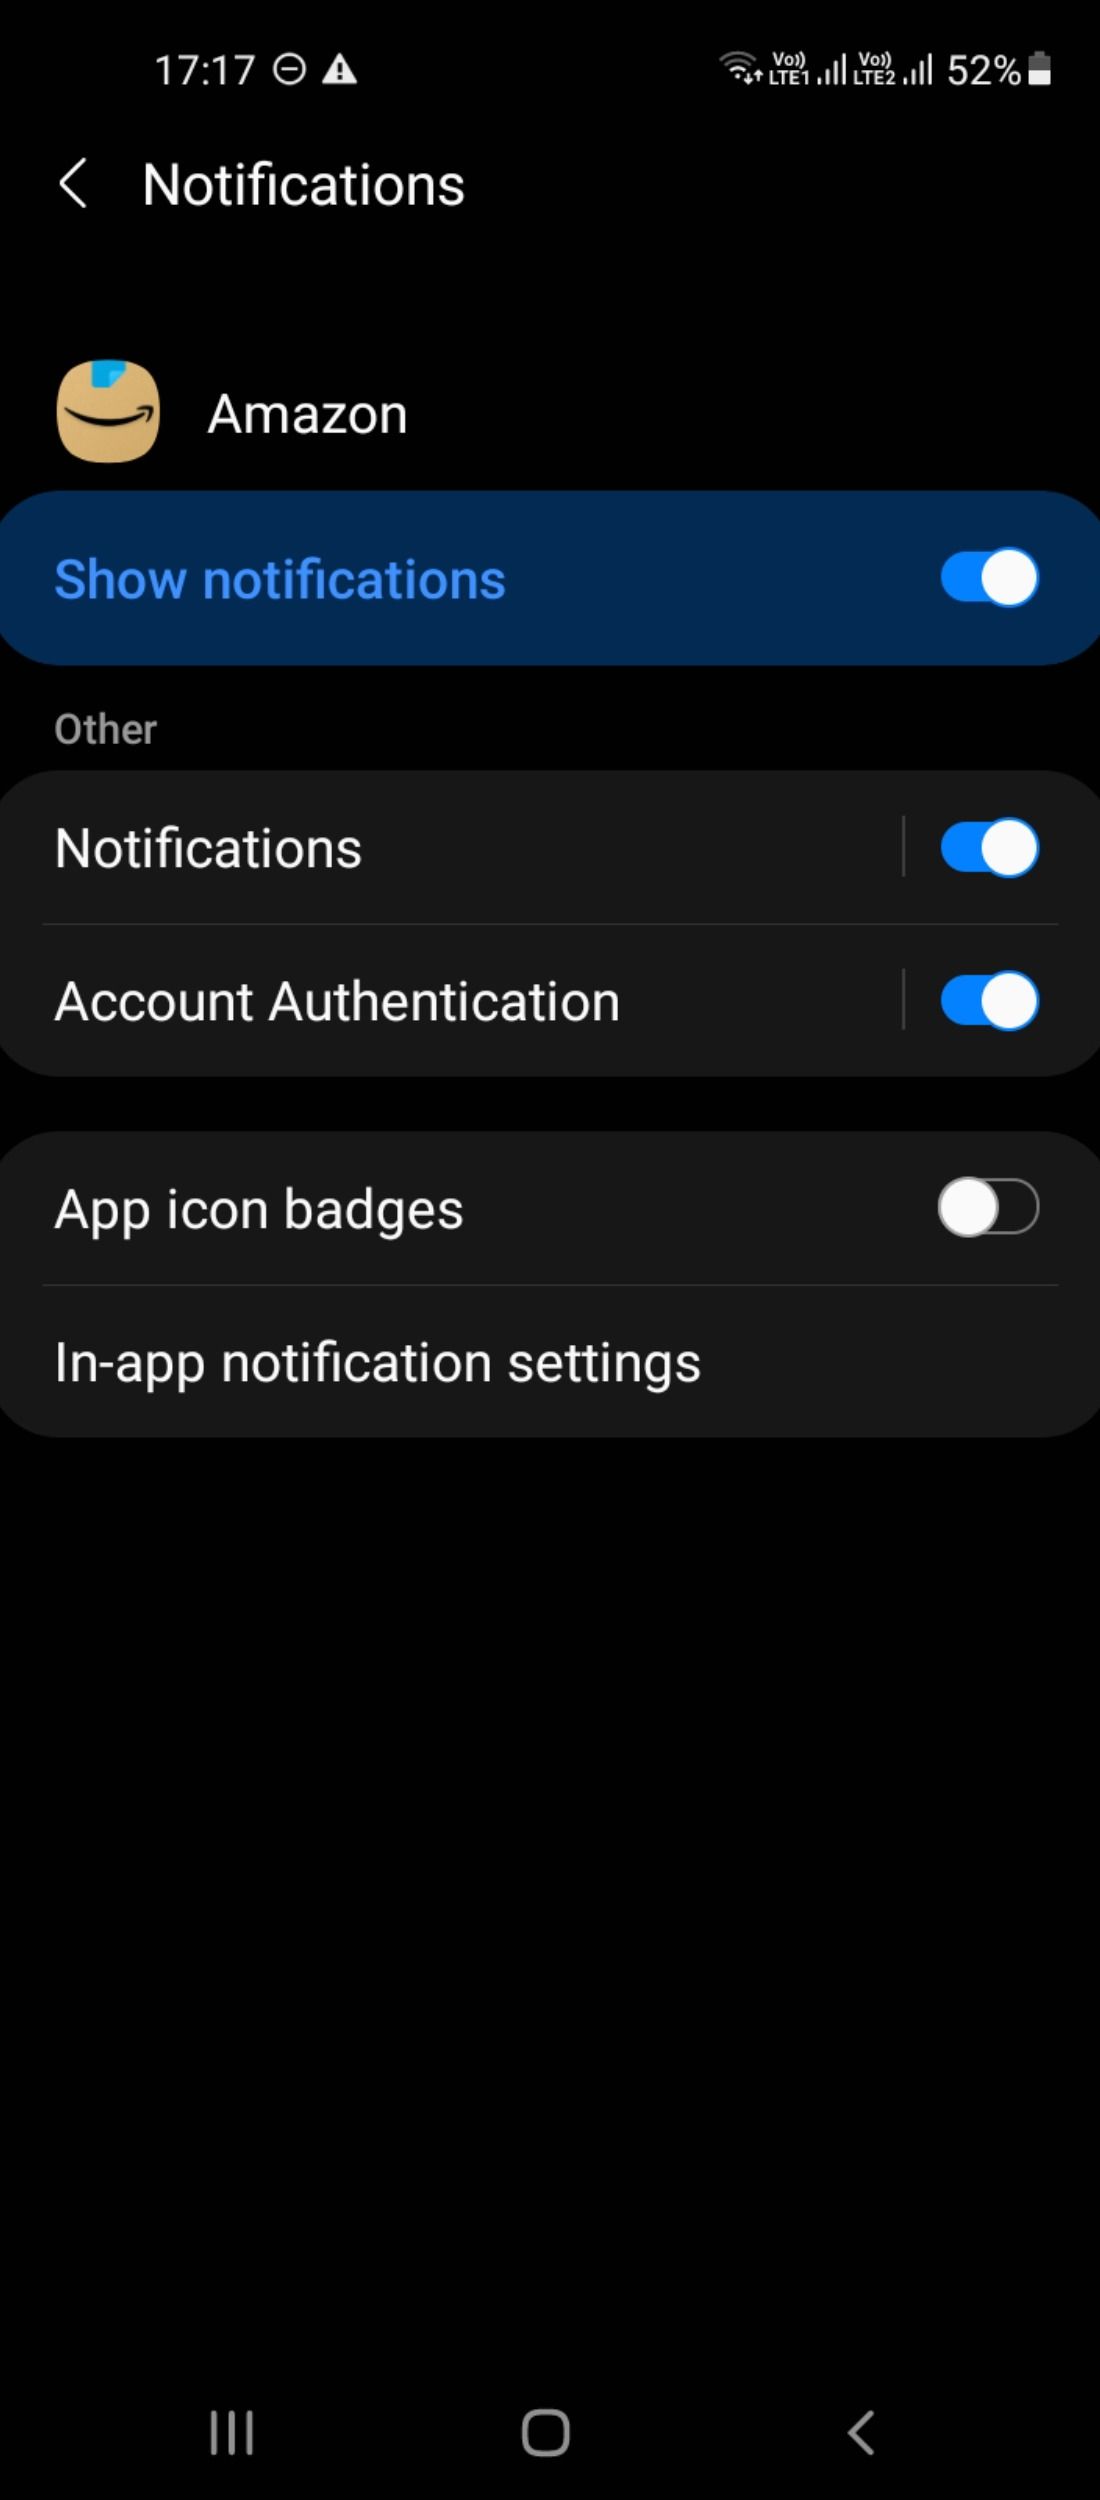 Turned off notifications in Amazon app